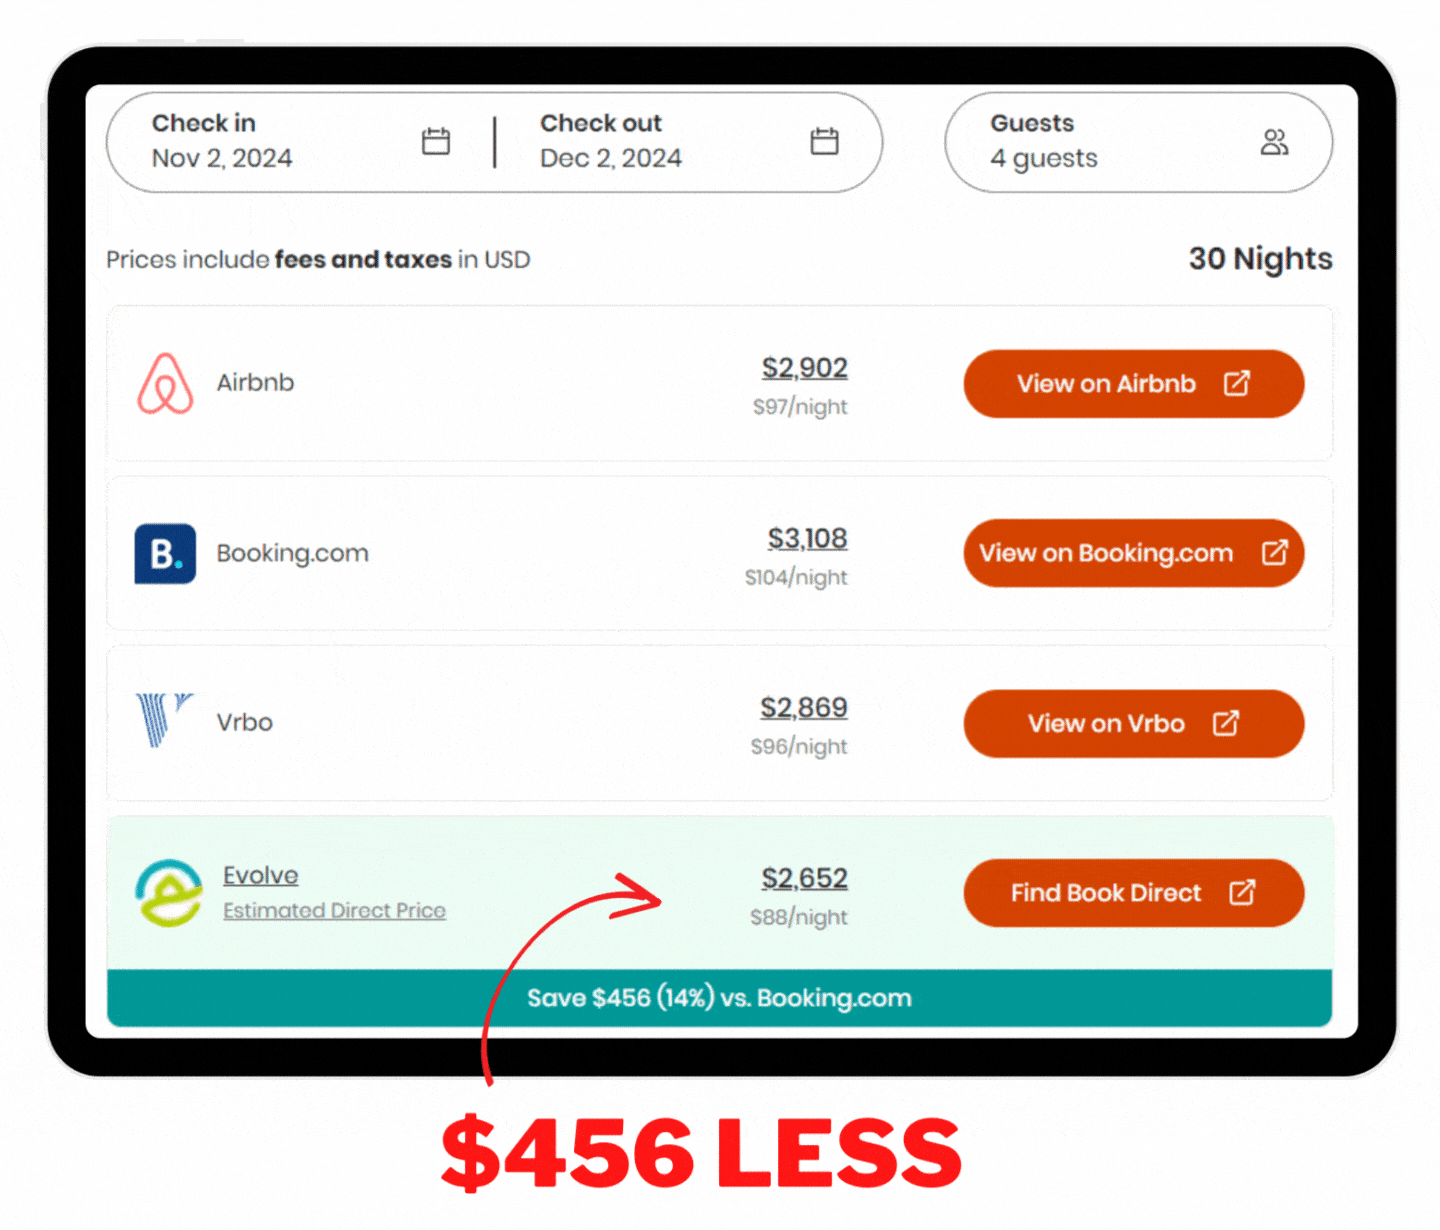 Lake Ivanhoe Airbnb, Orlando price comparisons including a book direct option